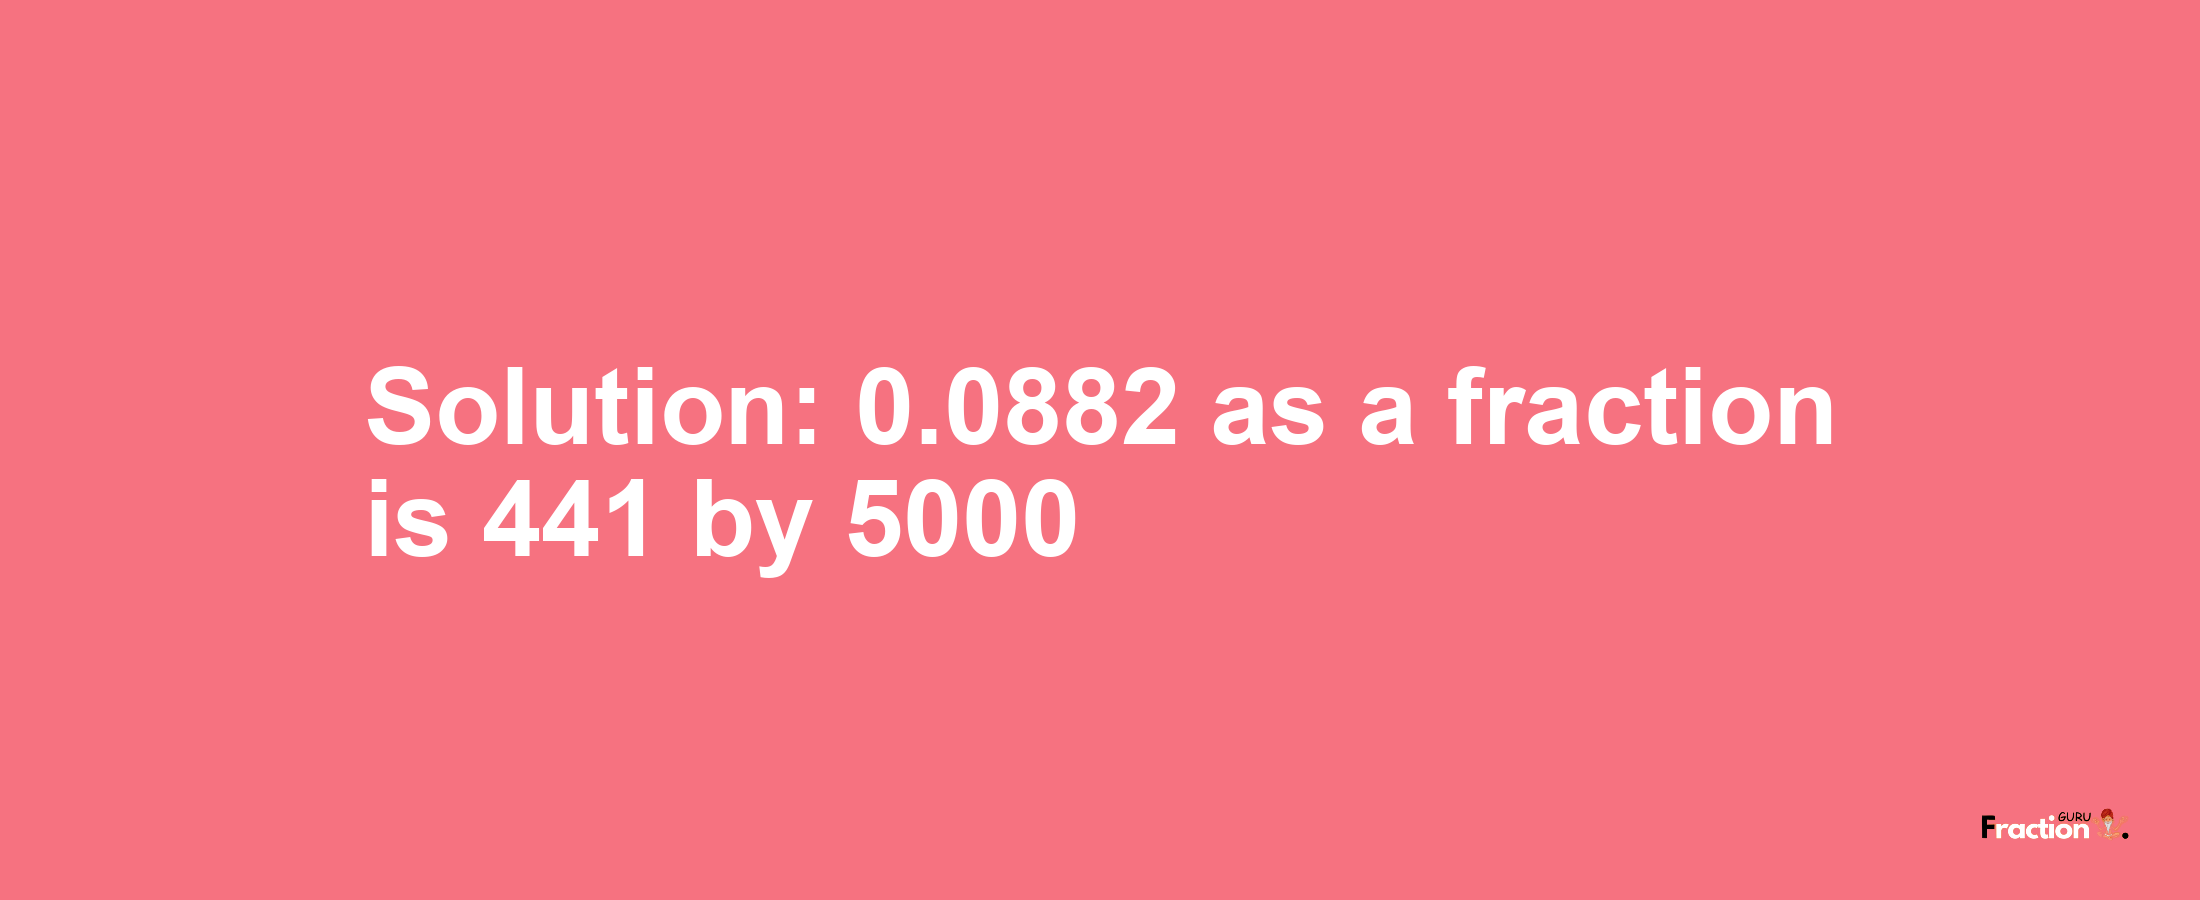 Solution:0.0882 as a fraction is 441/5000